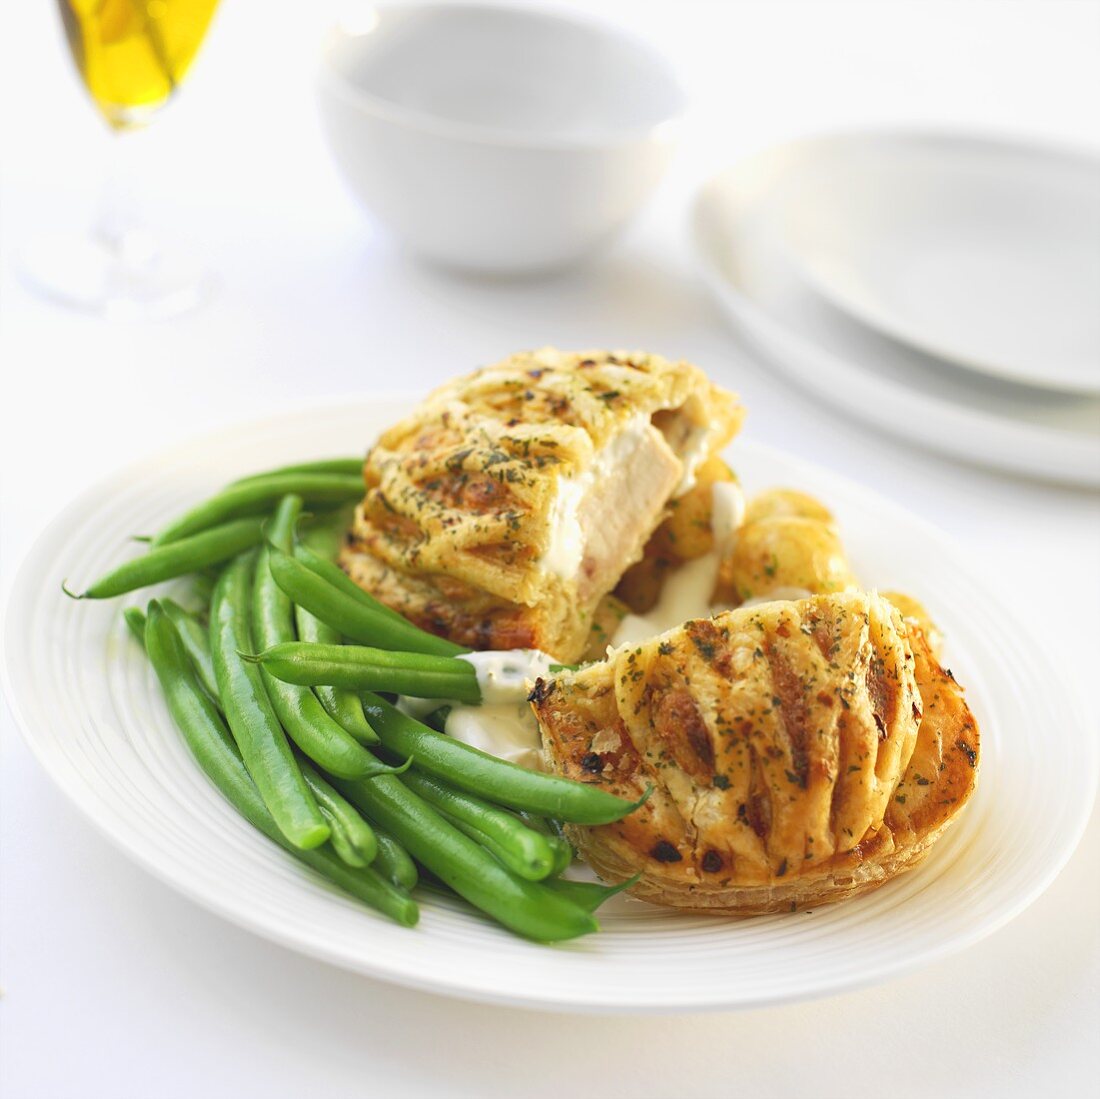 Chicken breast wrapped in puff pastry with garlic sauce and green beans